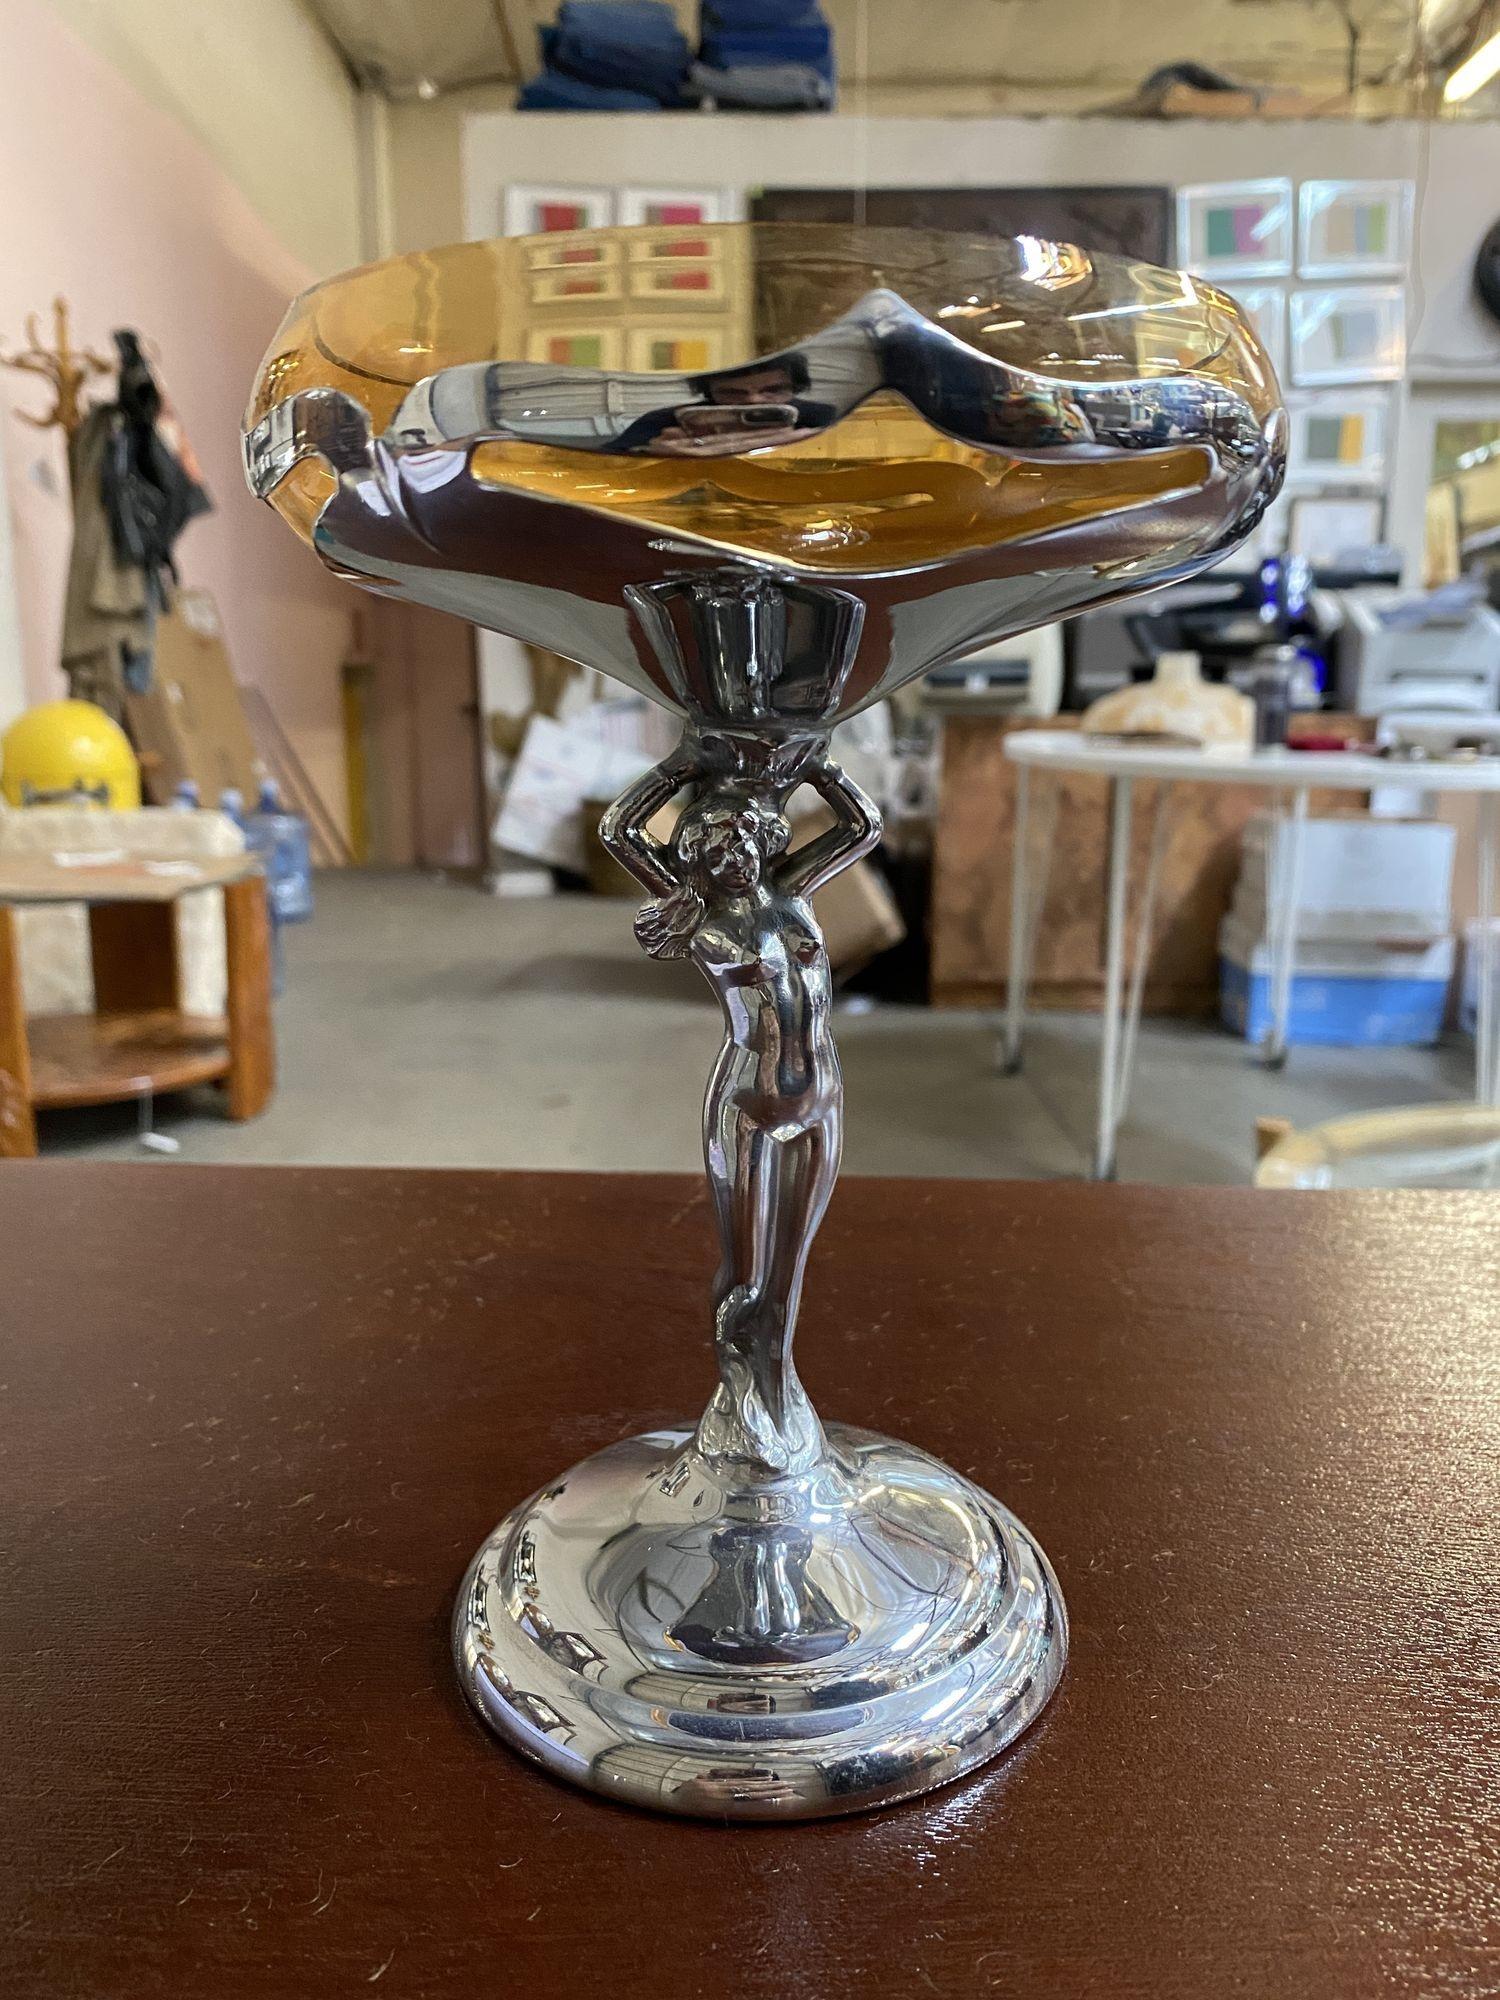 Vintage Farberware compote featuring a chrome stem with a nude woman having a Cambridge insert from 1932. The compote features a nude women standing on a stepped round base holding up an amber glass cup insert.

The compote is 7 ¾ inches tall, the